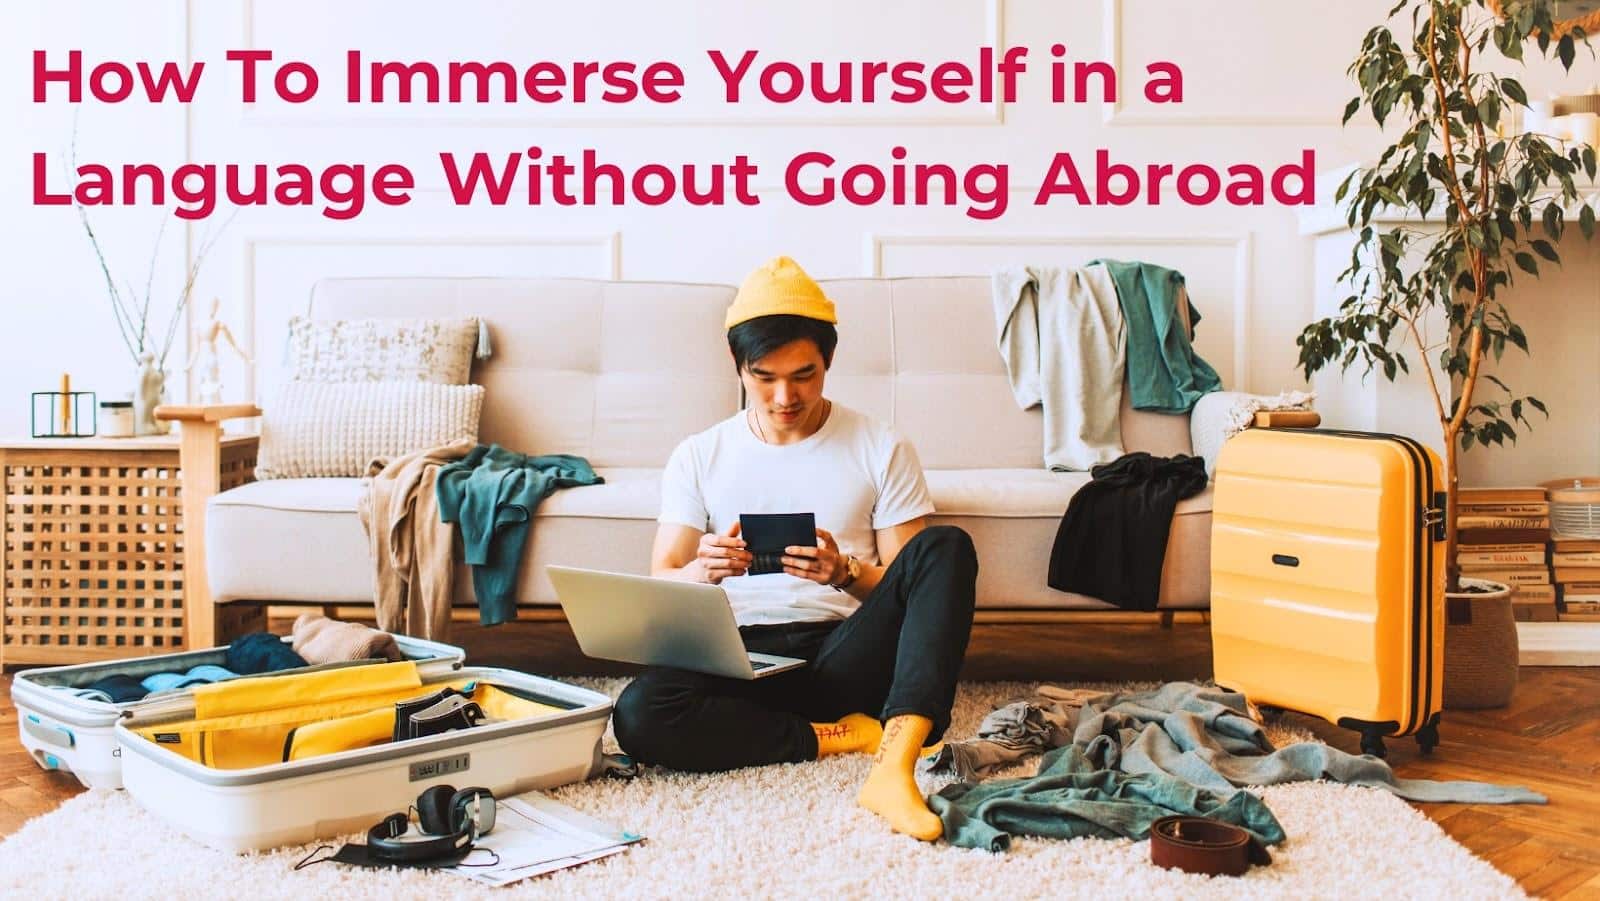 7 Ways to Immerse Yourself in Language without going abroad